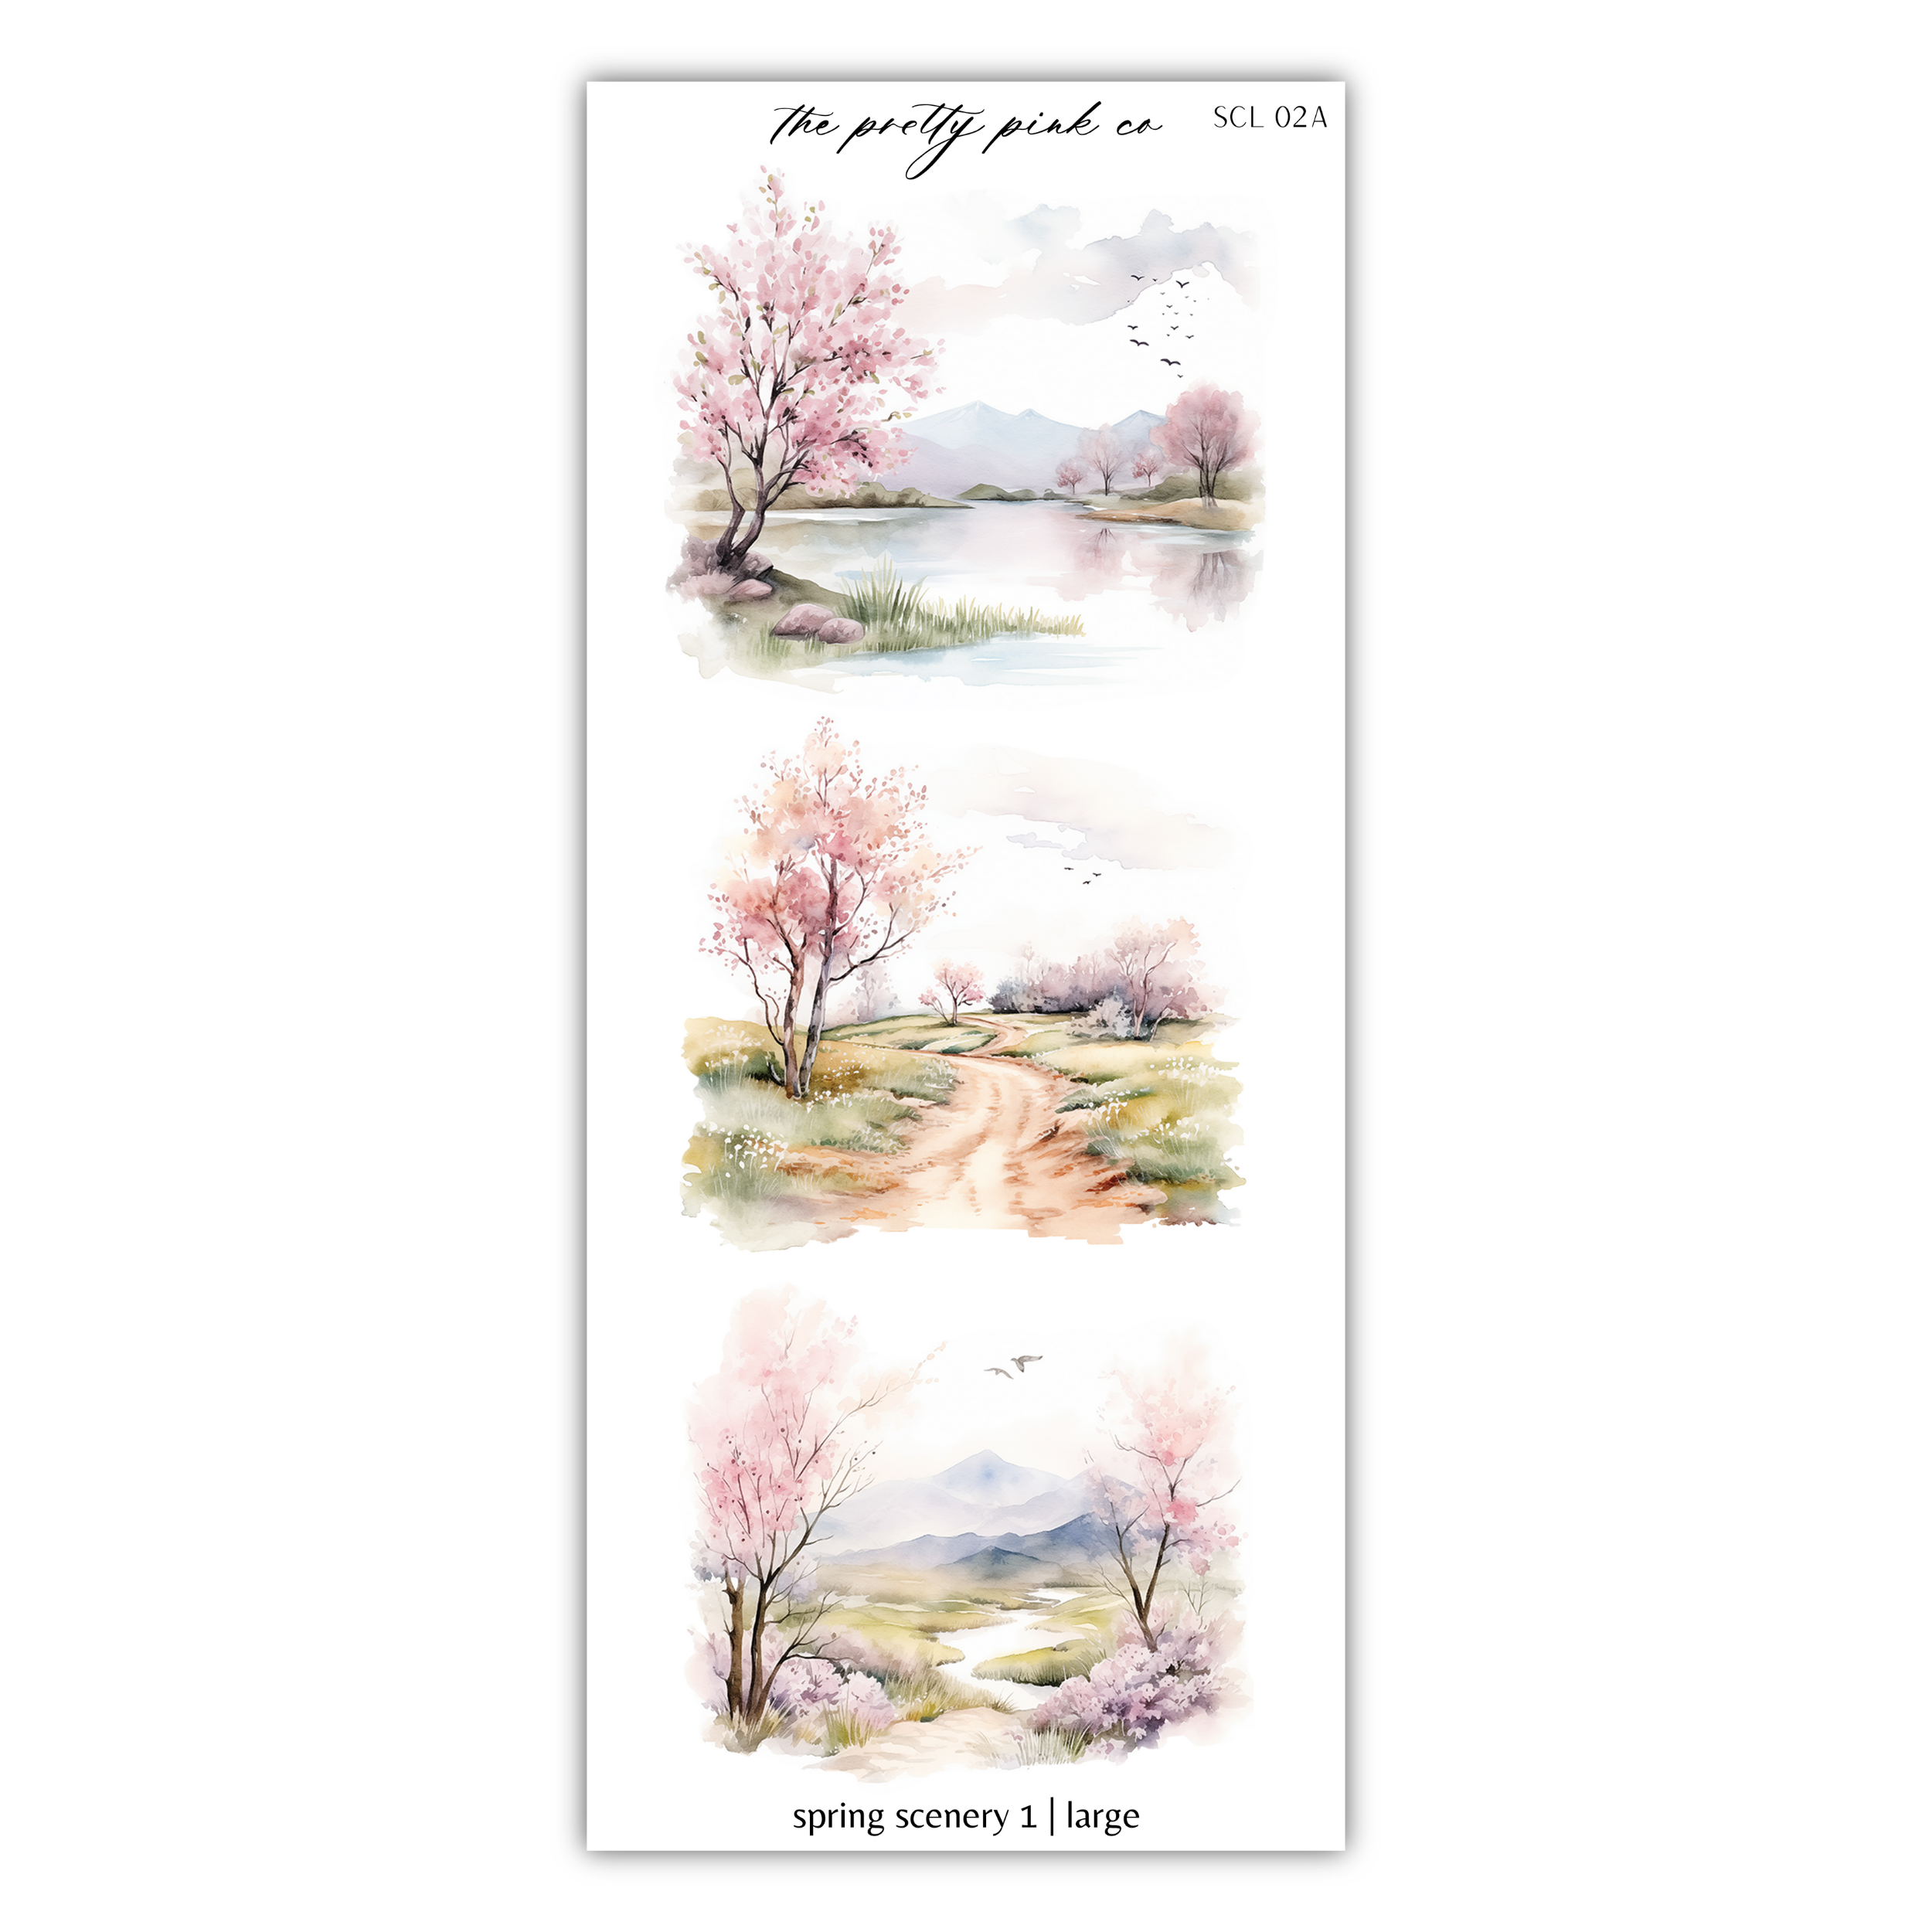 a watercolor painting of trees and a river